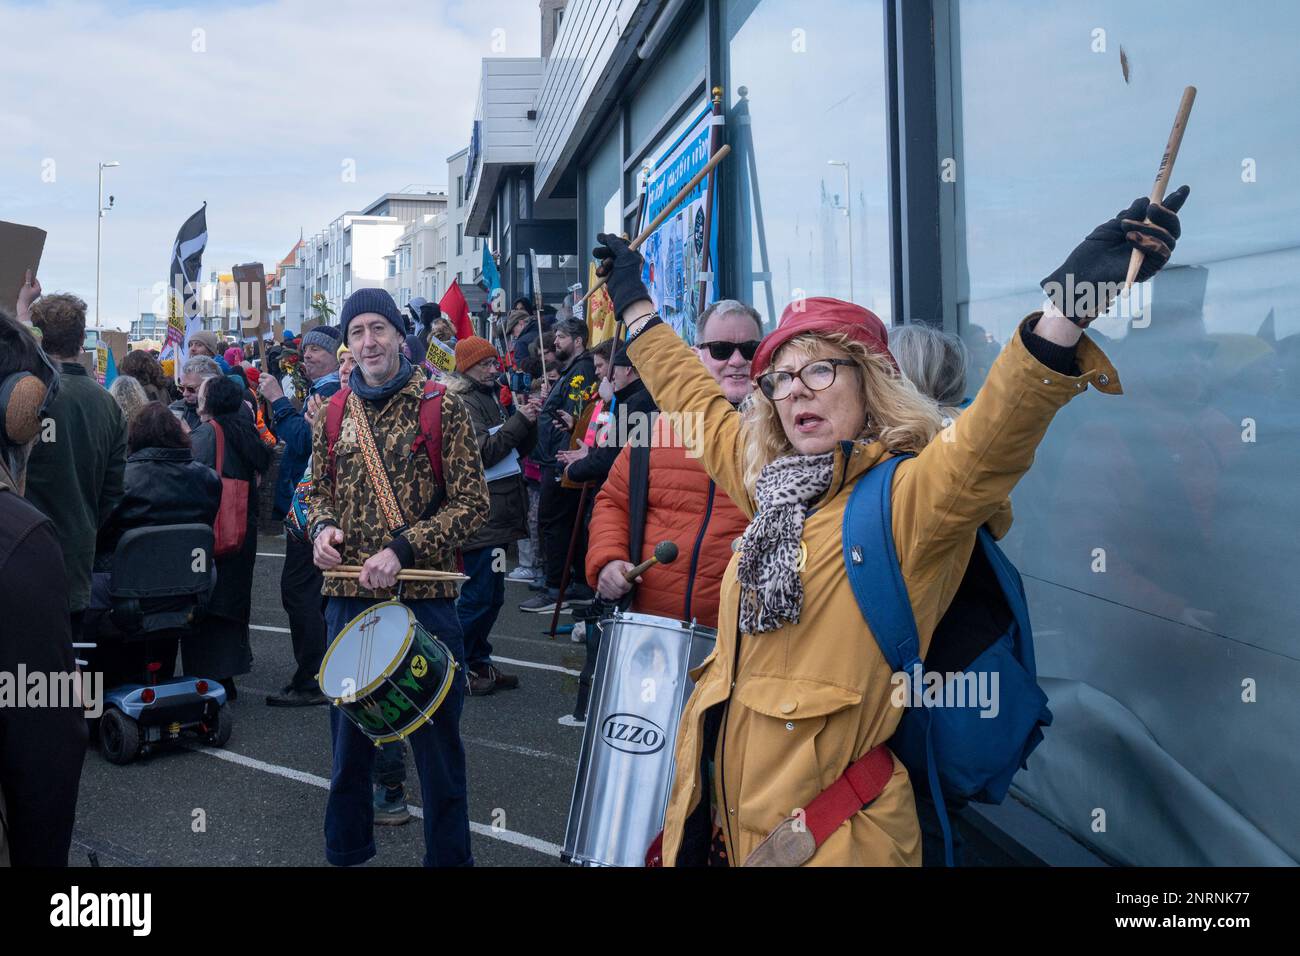 Drummers providing a musical background at a counter demonstration organised by anti-fascist groups against a protest by the right wing group Reform U Stock Photo